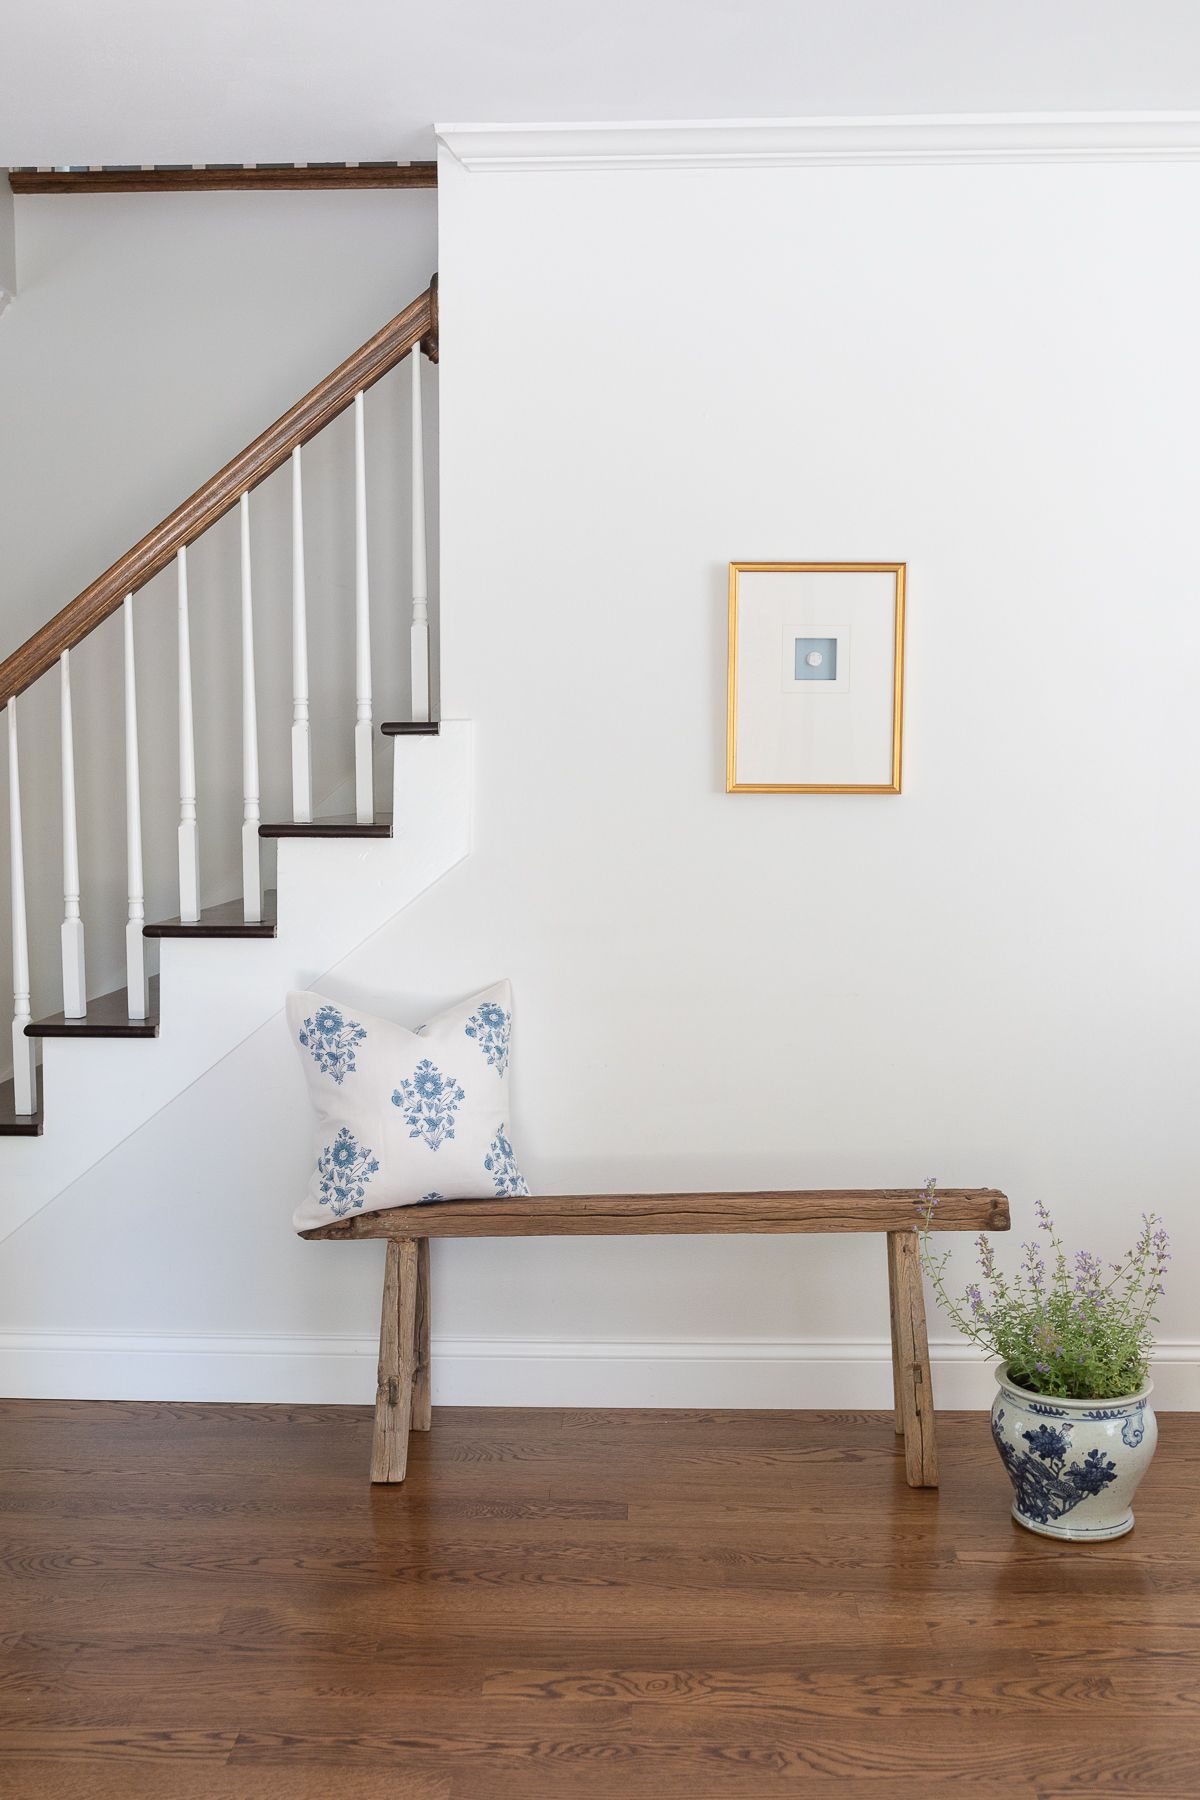 A gold framed intaglio in a white entryway of a home, wooden bench below. 